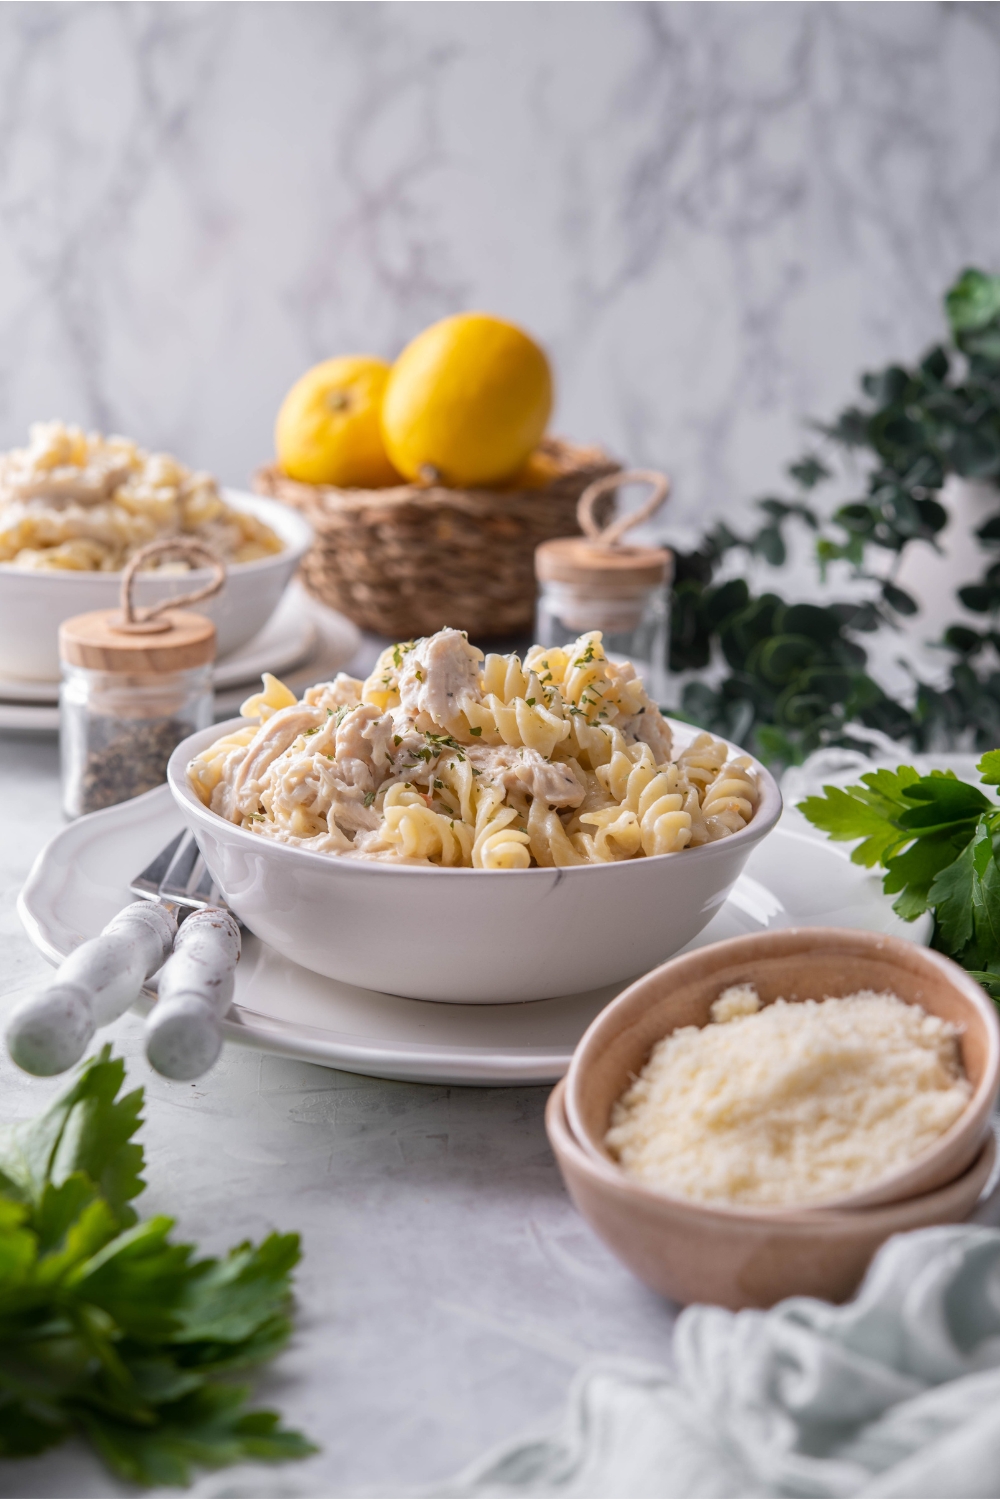 A bowl of cooked chicken and pasta in a cream sauce garnished with fresh herbs. The bowl is on a white plate with two forks on the plate and it is surrounded by ingredients including parsley, grated parmesan cheese, and a bowl of lemons.